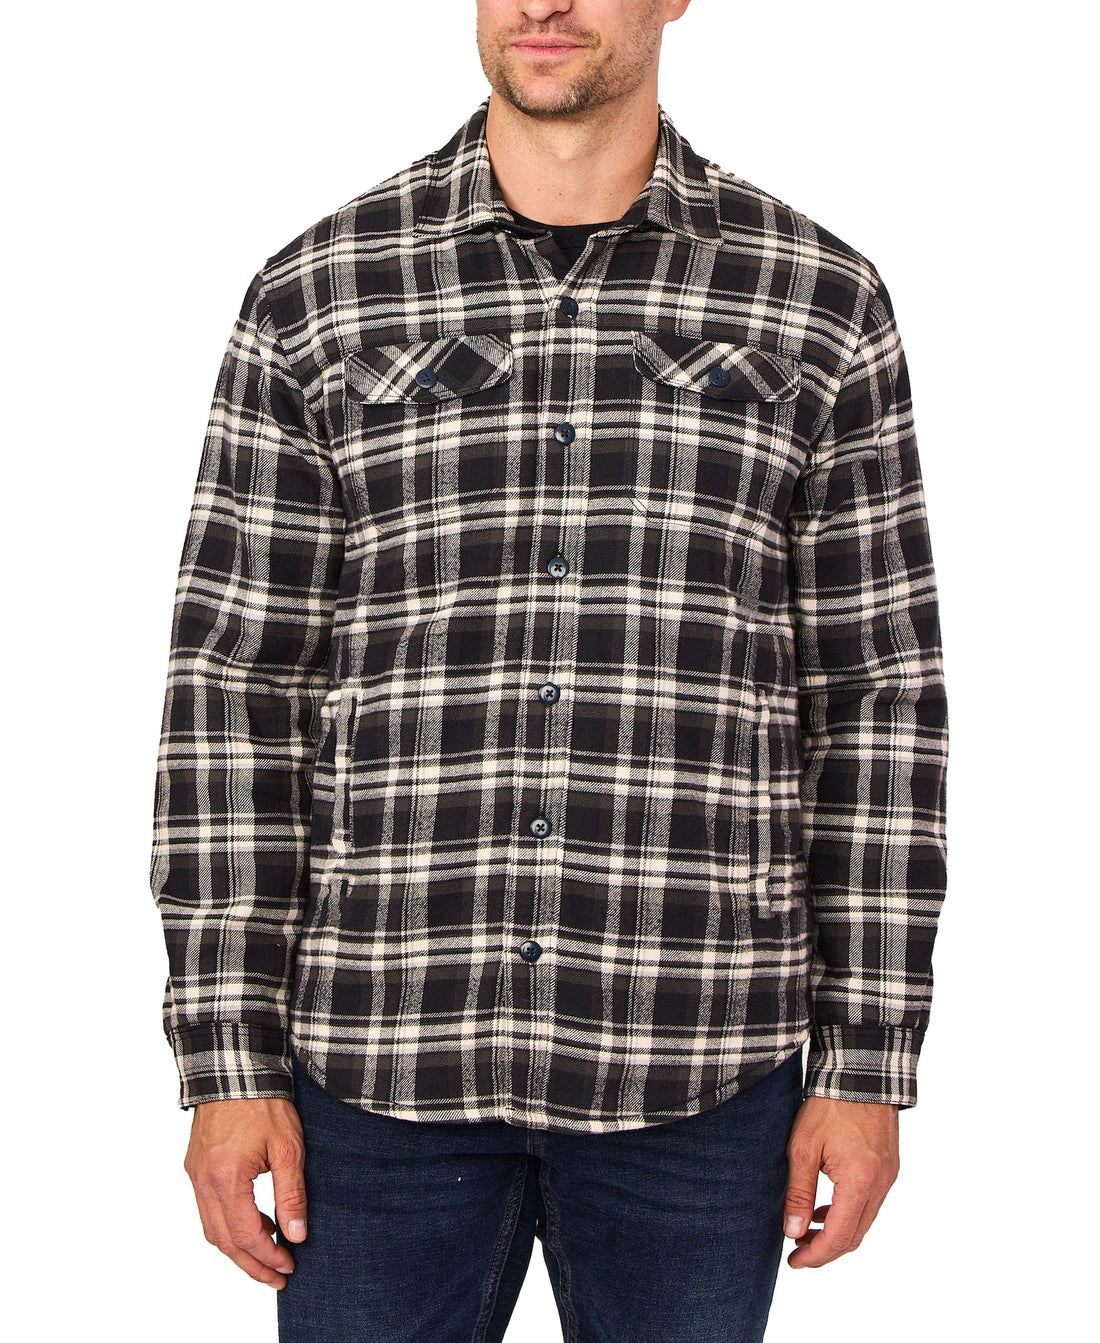 THE CAMPFIRE HEAVYWEIGHT BRUSHED FLANNEL SHIRT